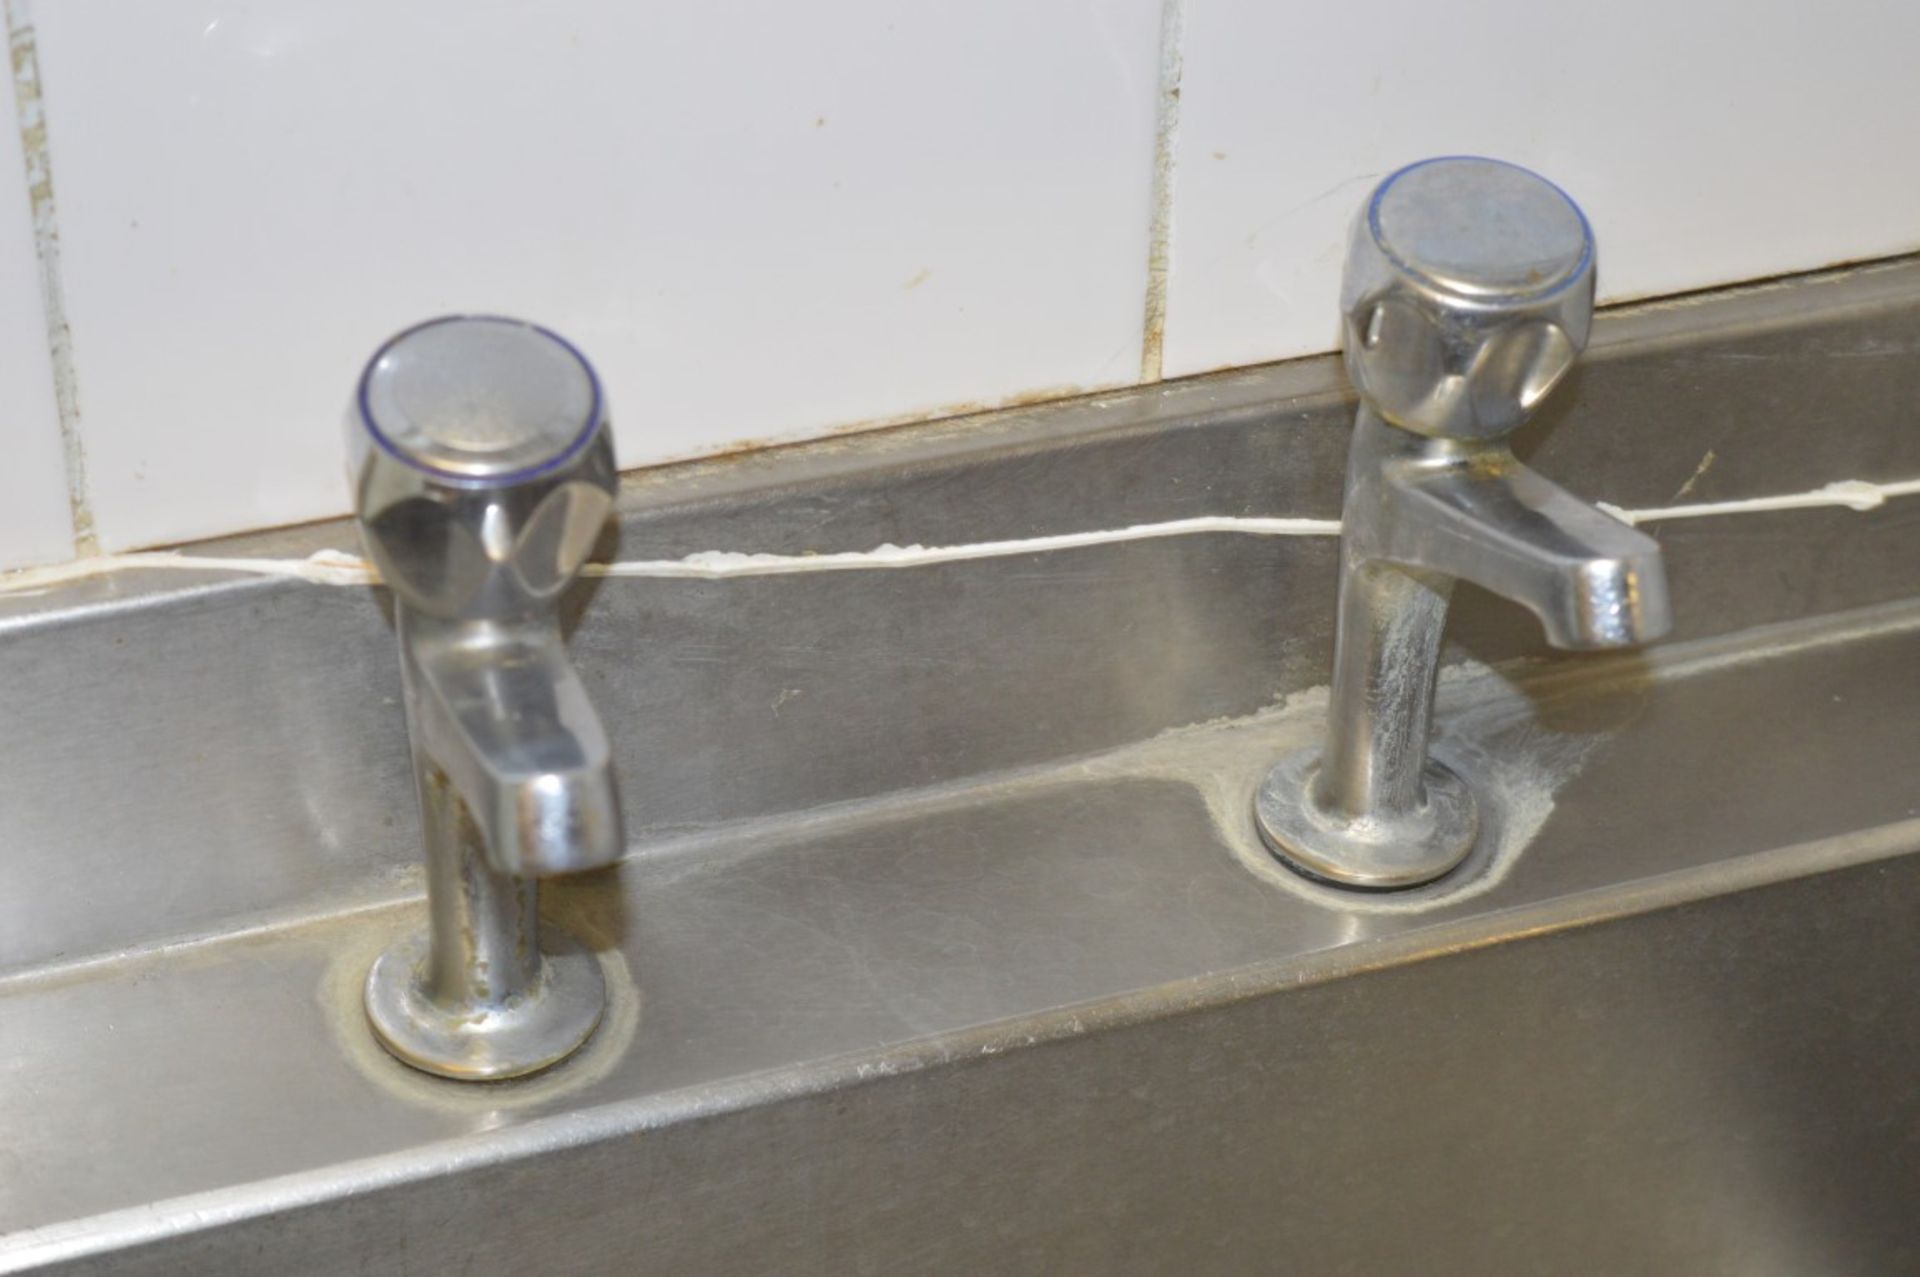 1 x Stainless Steel Double Bowl Sink Counter With Plug Straines - H87 x W251 x D60 cms - Ref GD212 - - Image 5 of 6